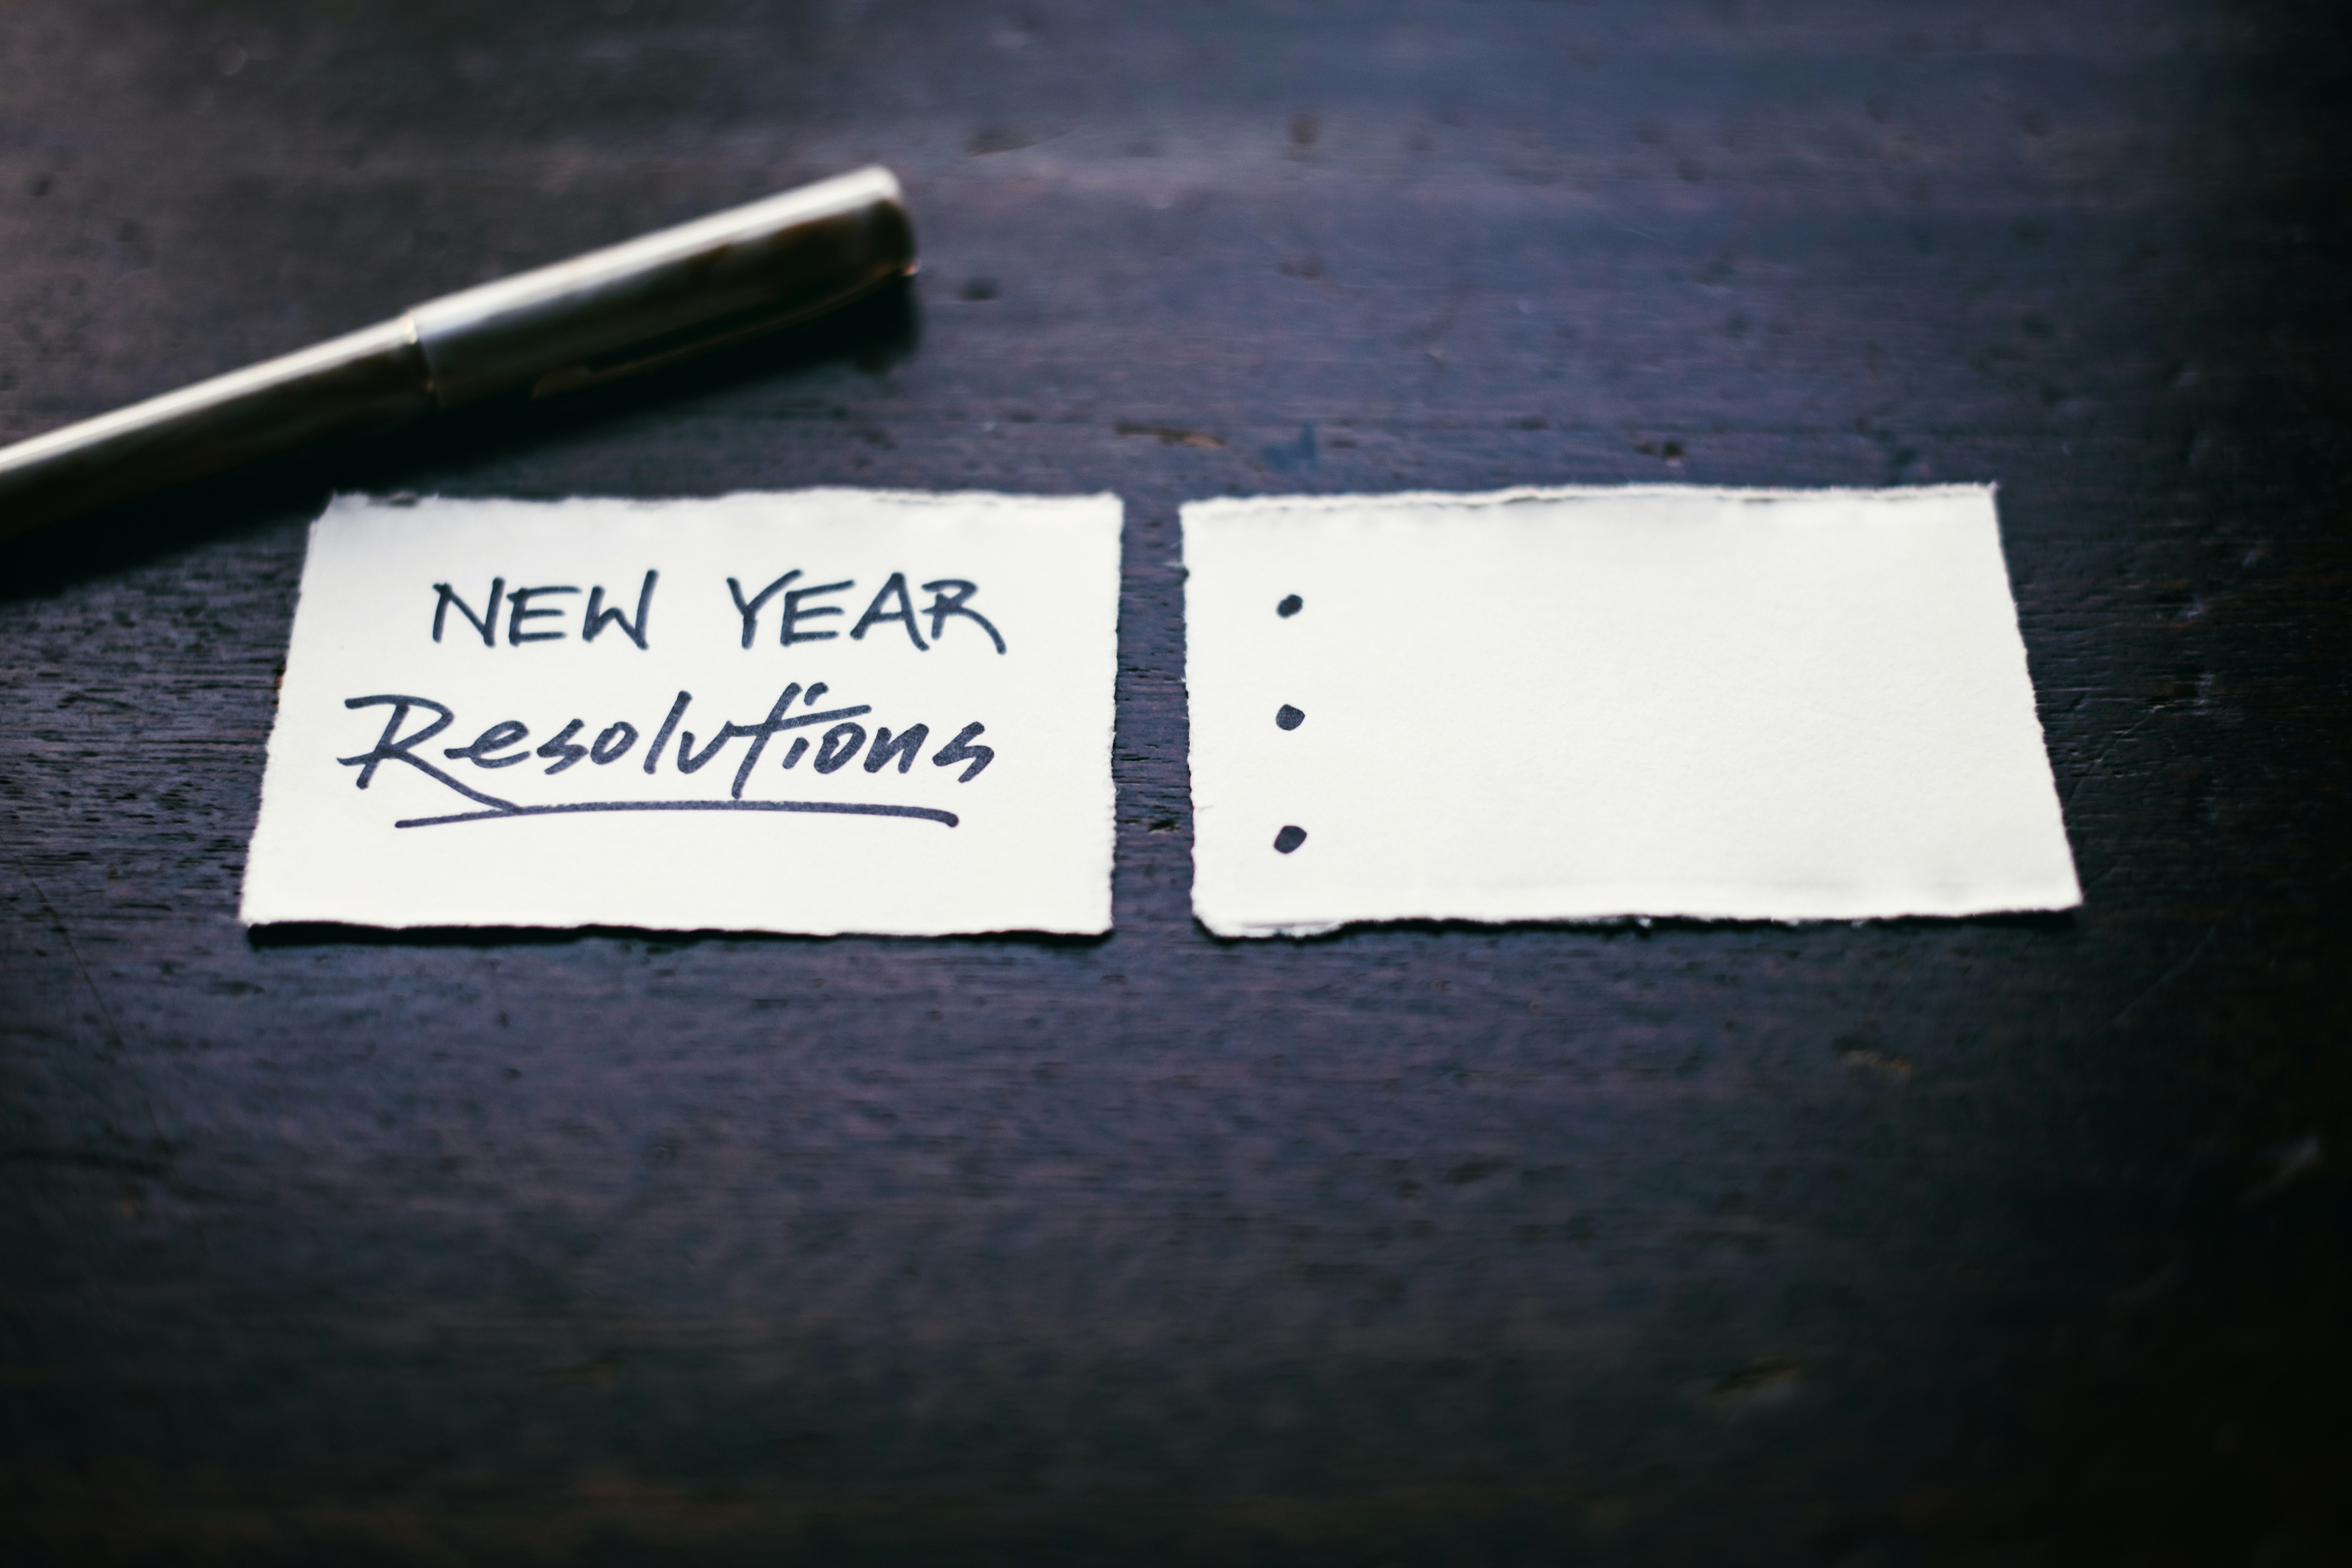 The tradition of making new year's resolutions 